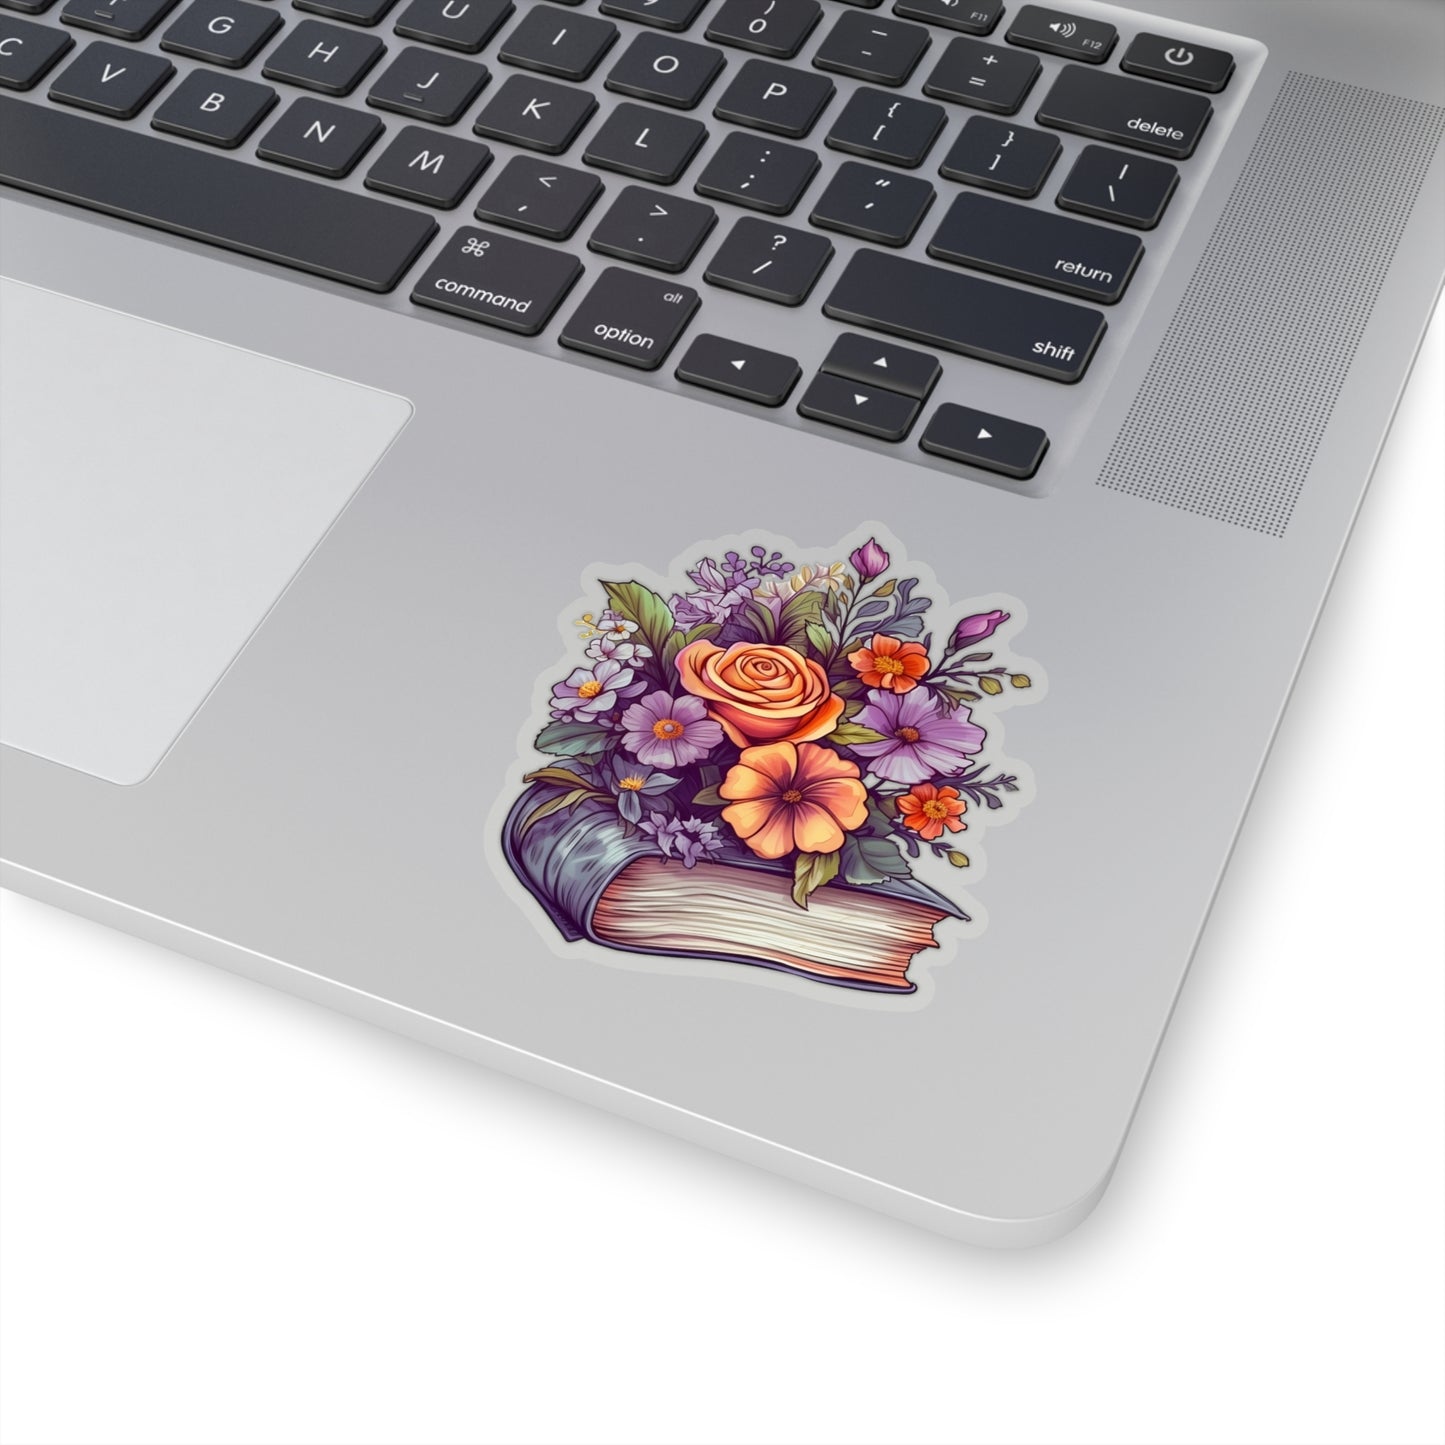 Book with Flowers Sticker, Library Reading Art Laptop Decal Vinyl Cute Waterbottle Tumbler Car Waterproof Bumper Die Cut Wall Clear Starcove Fashion